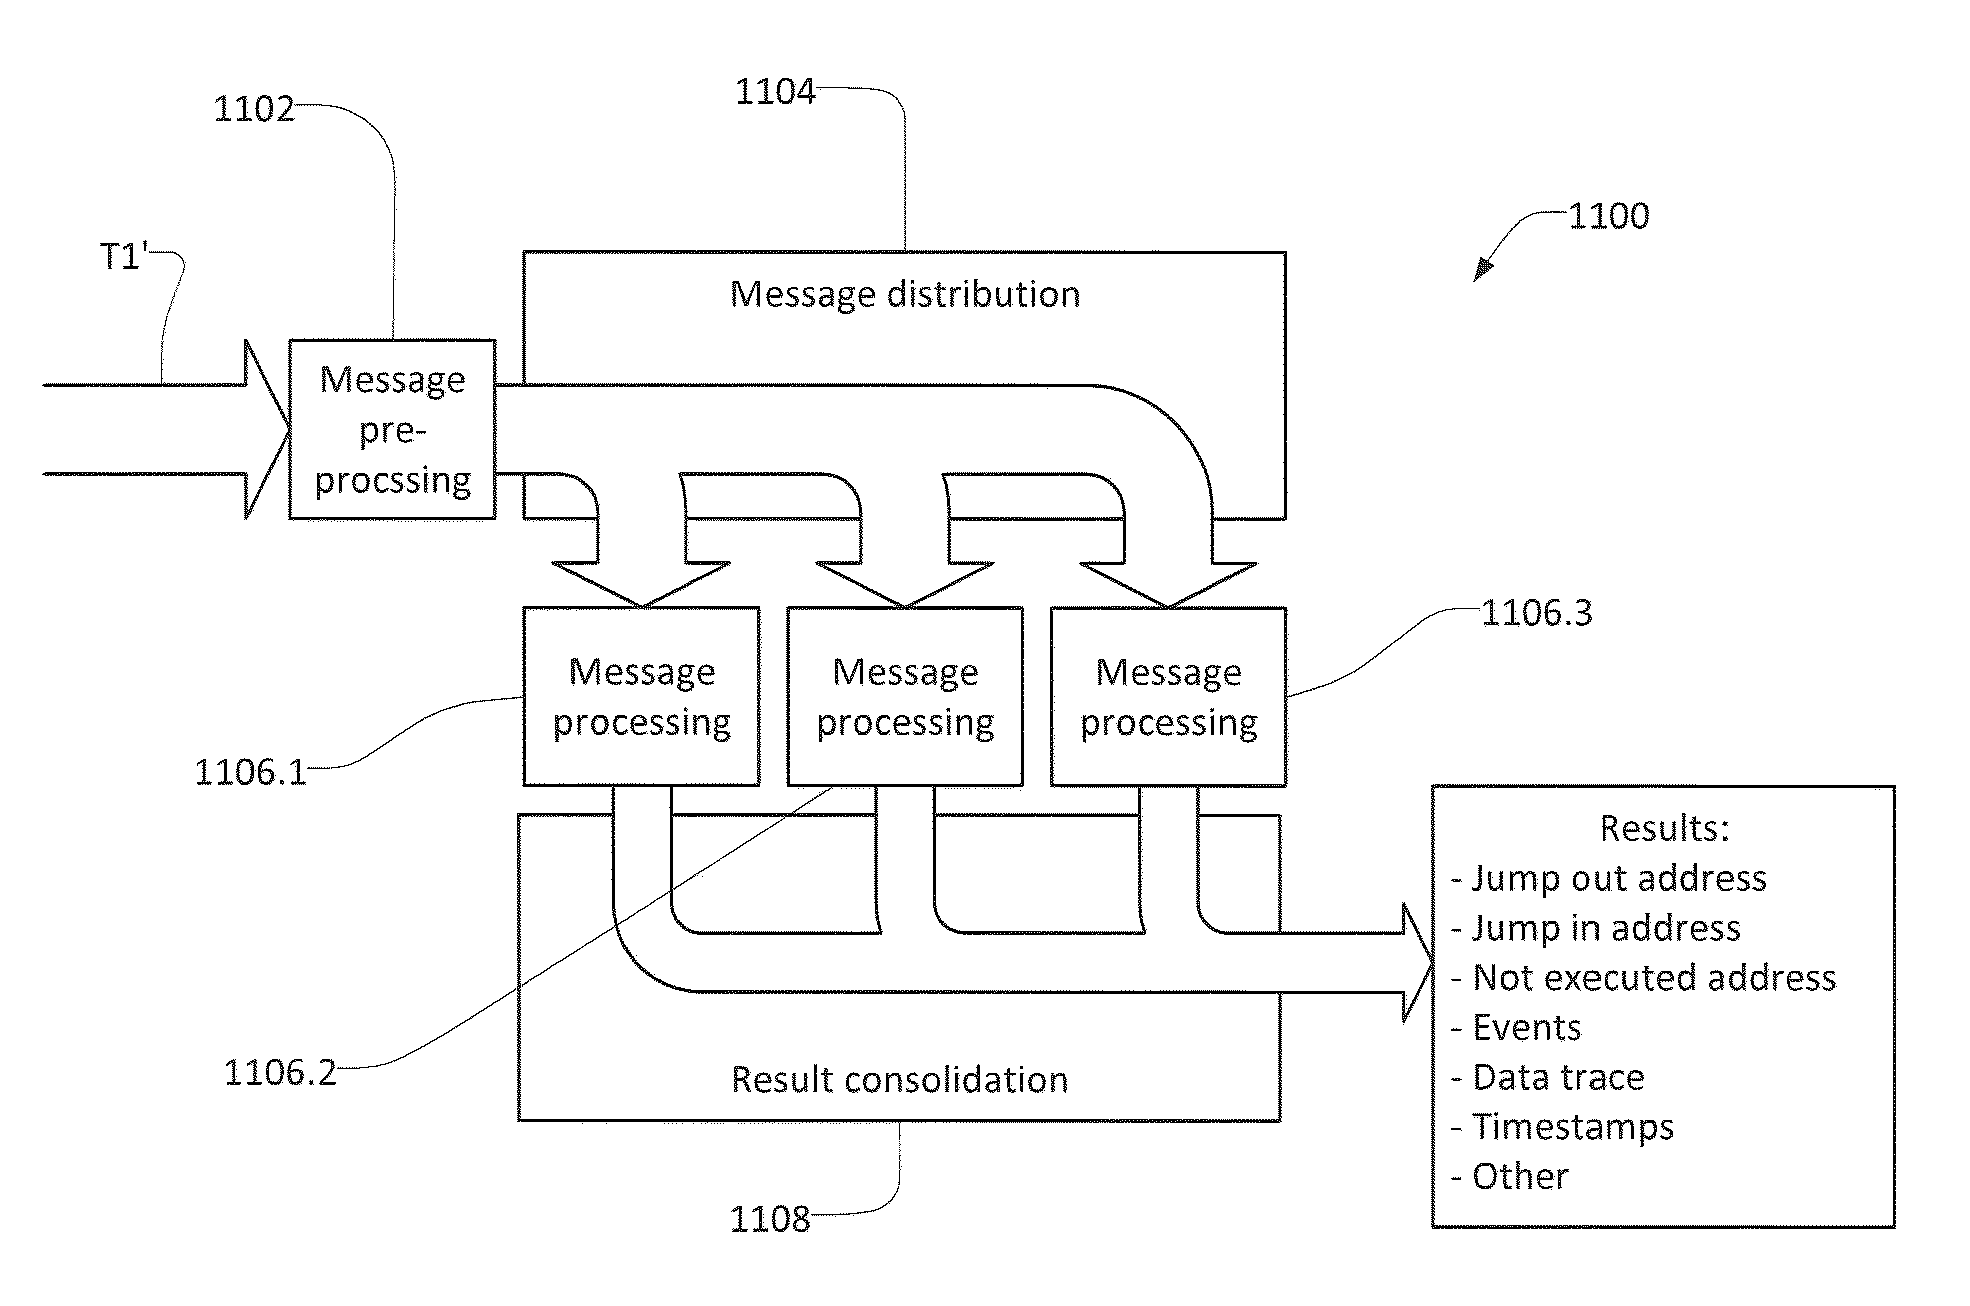 Trace-data processing and profiling device